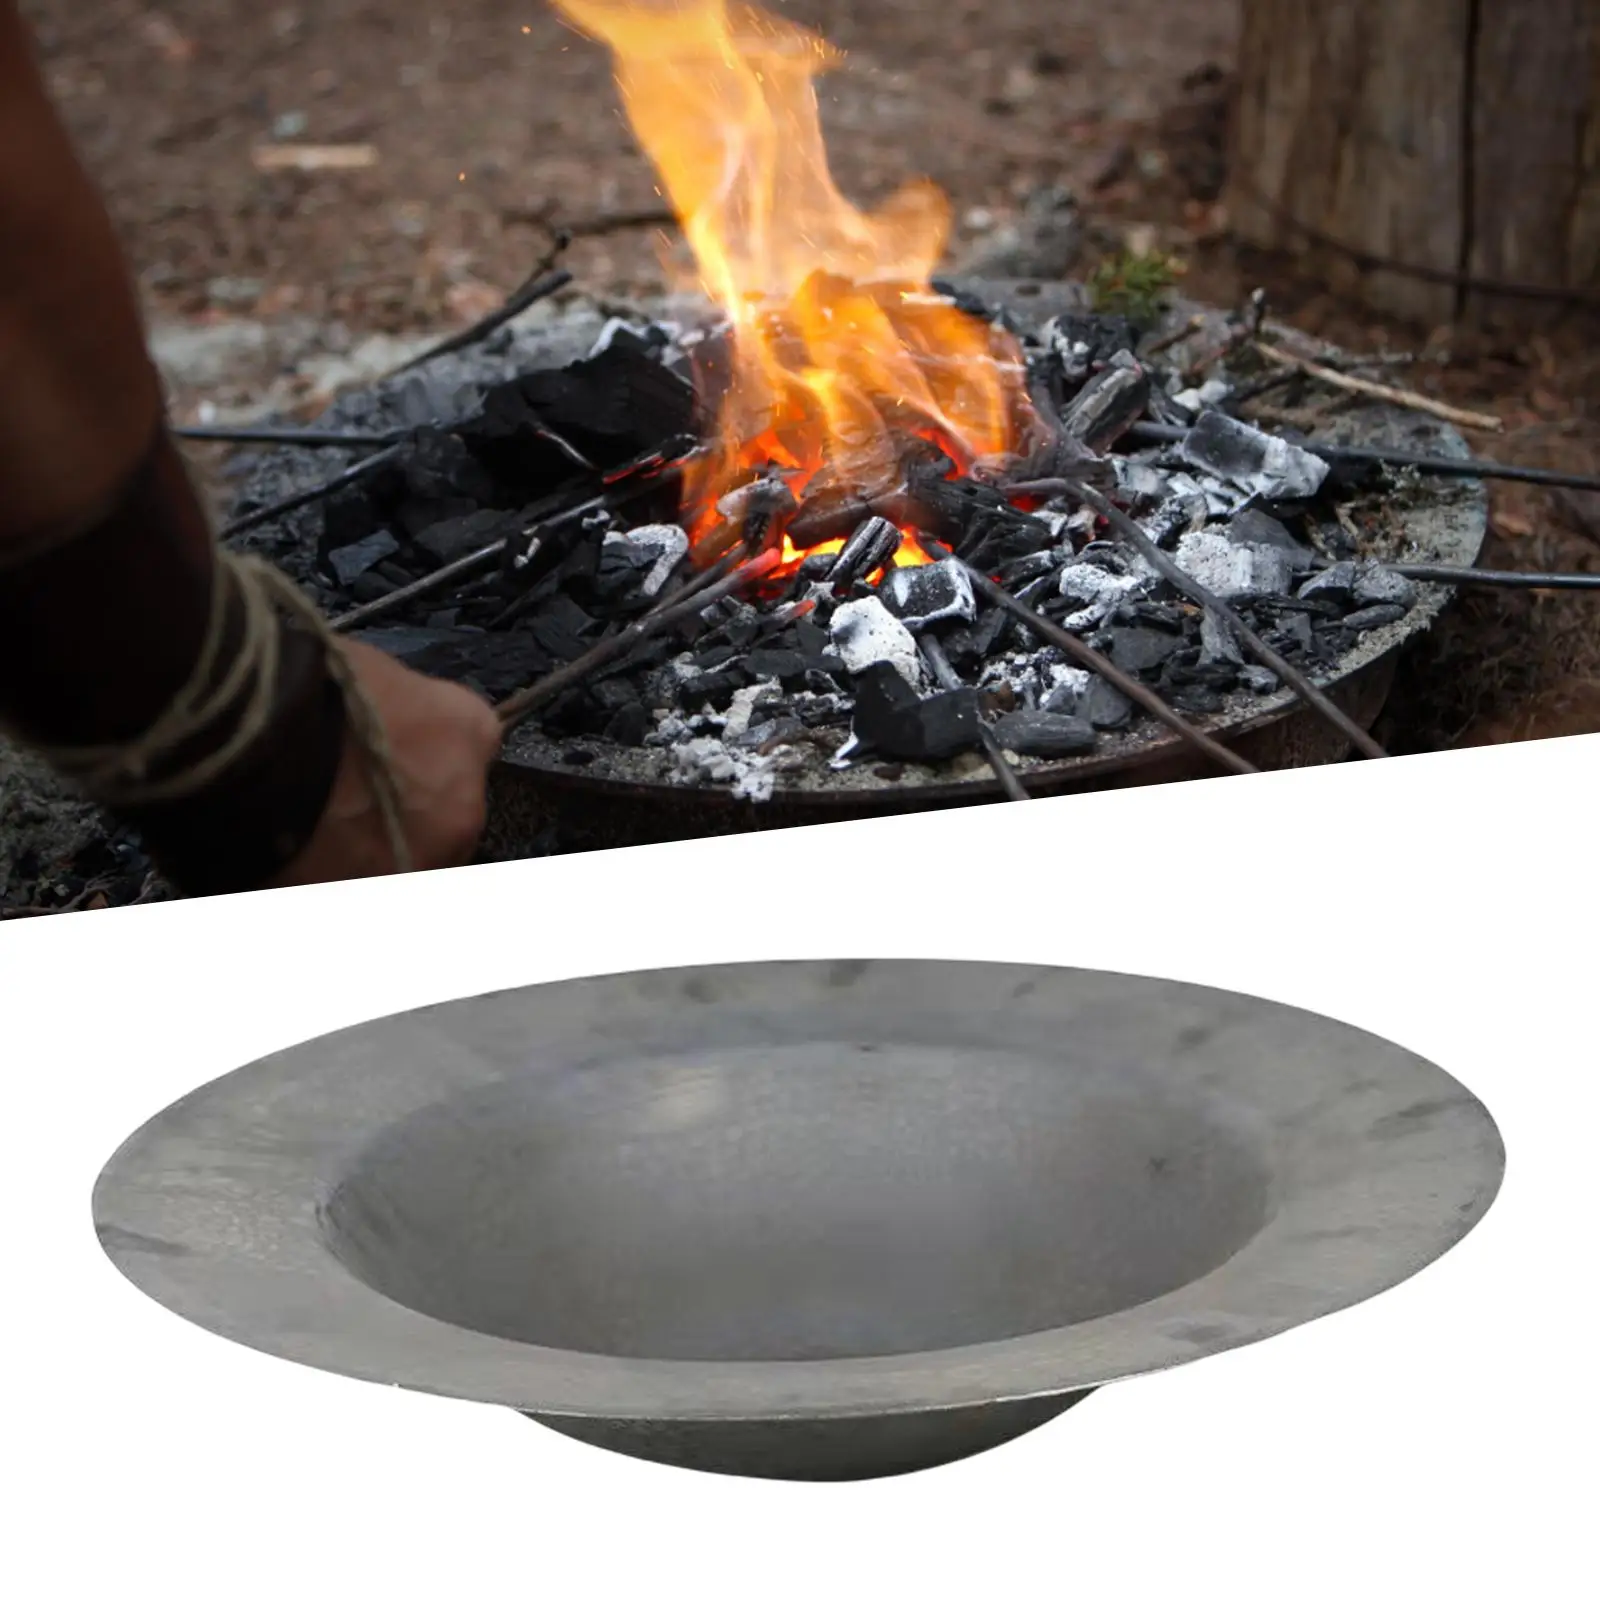 Round Fire Bowl Pit BBQ Charcoal Wood Burning Burner Sturdy Firewood Multifunction for Hiking Backyard Picnic Garden Outdoor